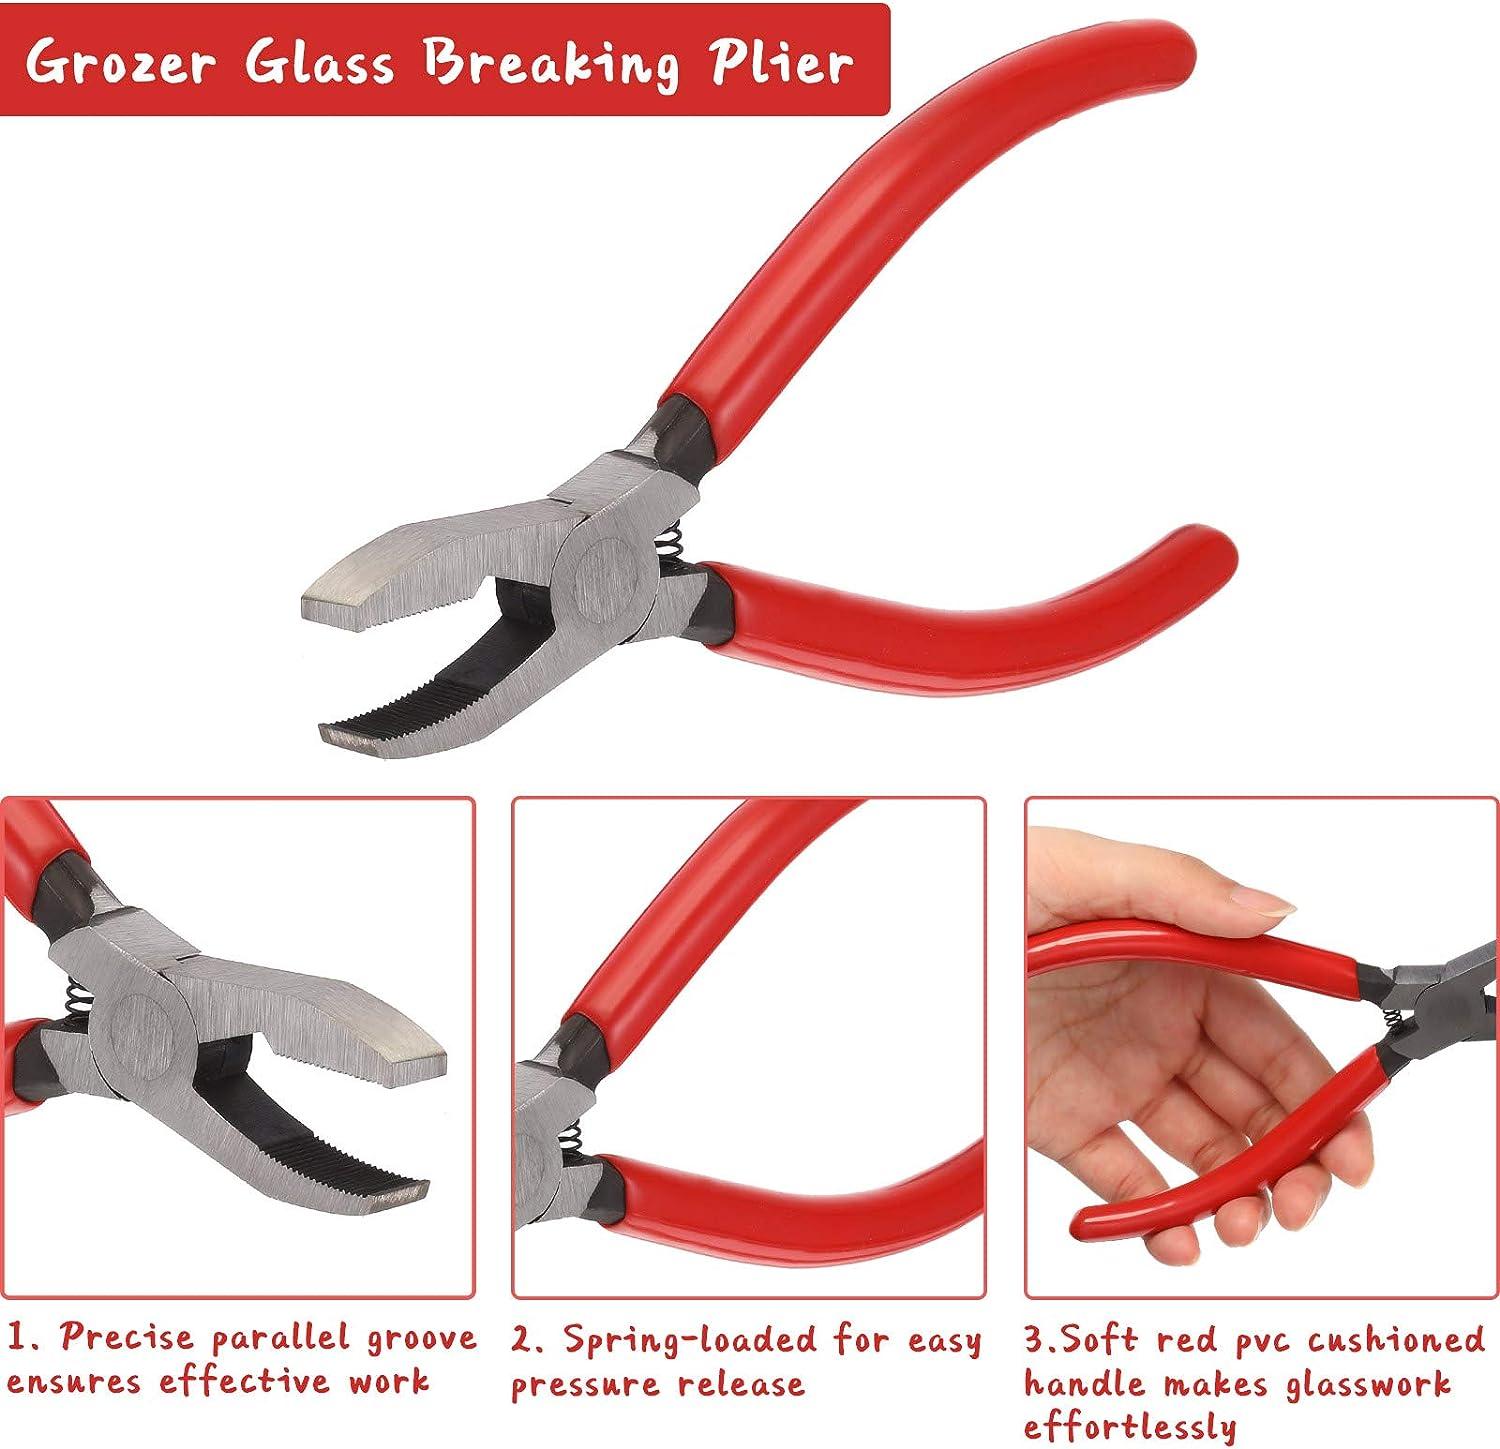 8 Pieces Glass Mosaic Cutter Kits Including Wheeled Glass Tile Nipper Glass  Running Plier Breaking Plier Hex Wrench and Pencil Style Oil Feed Glass  Cutting Tool 2 Blades and Oil Dispenser